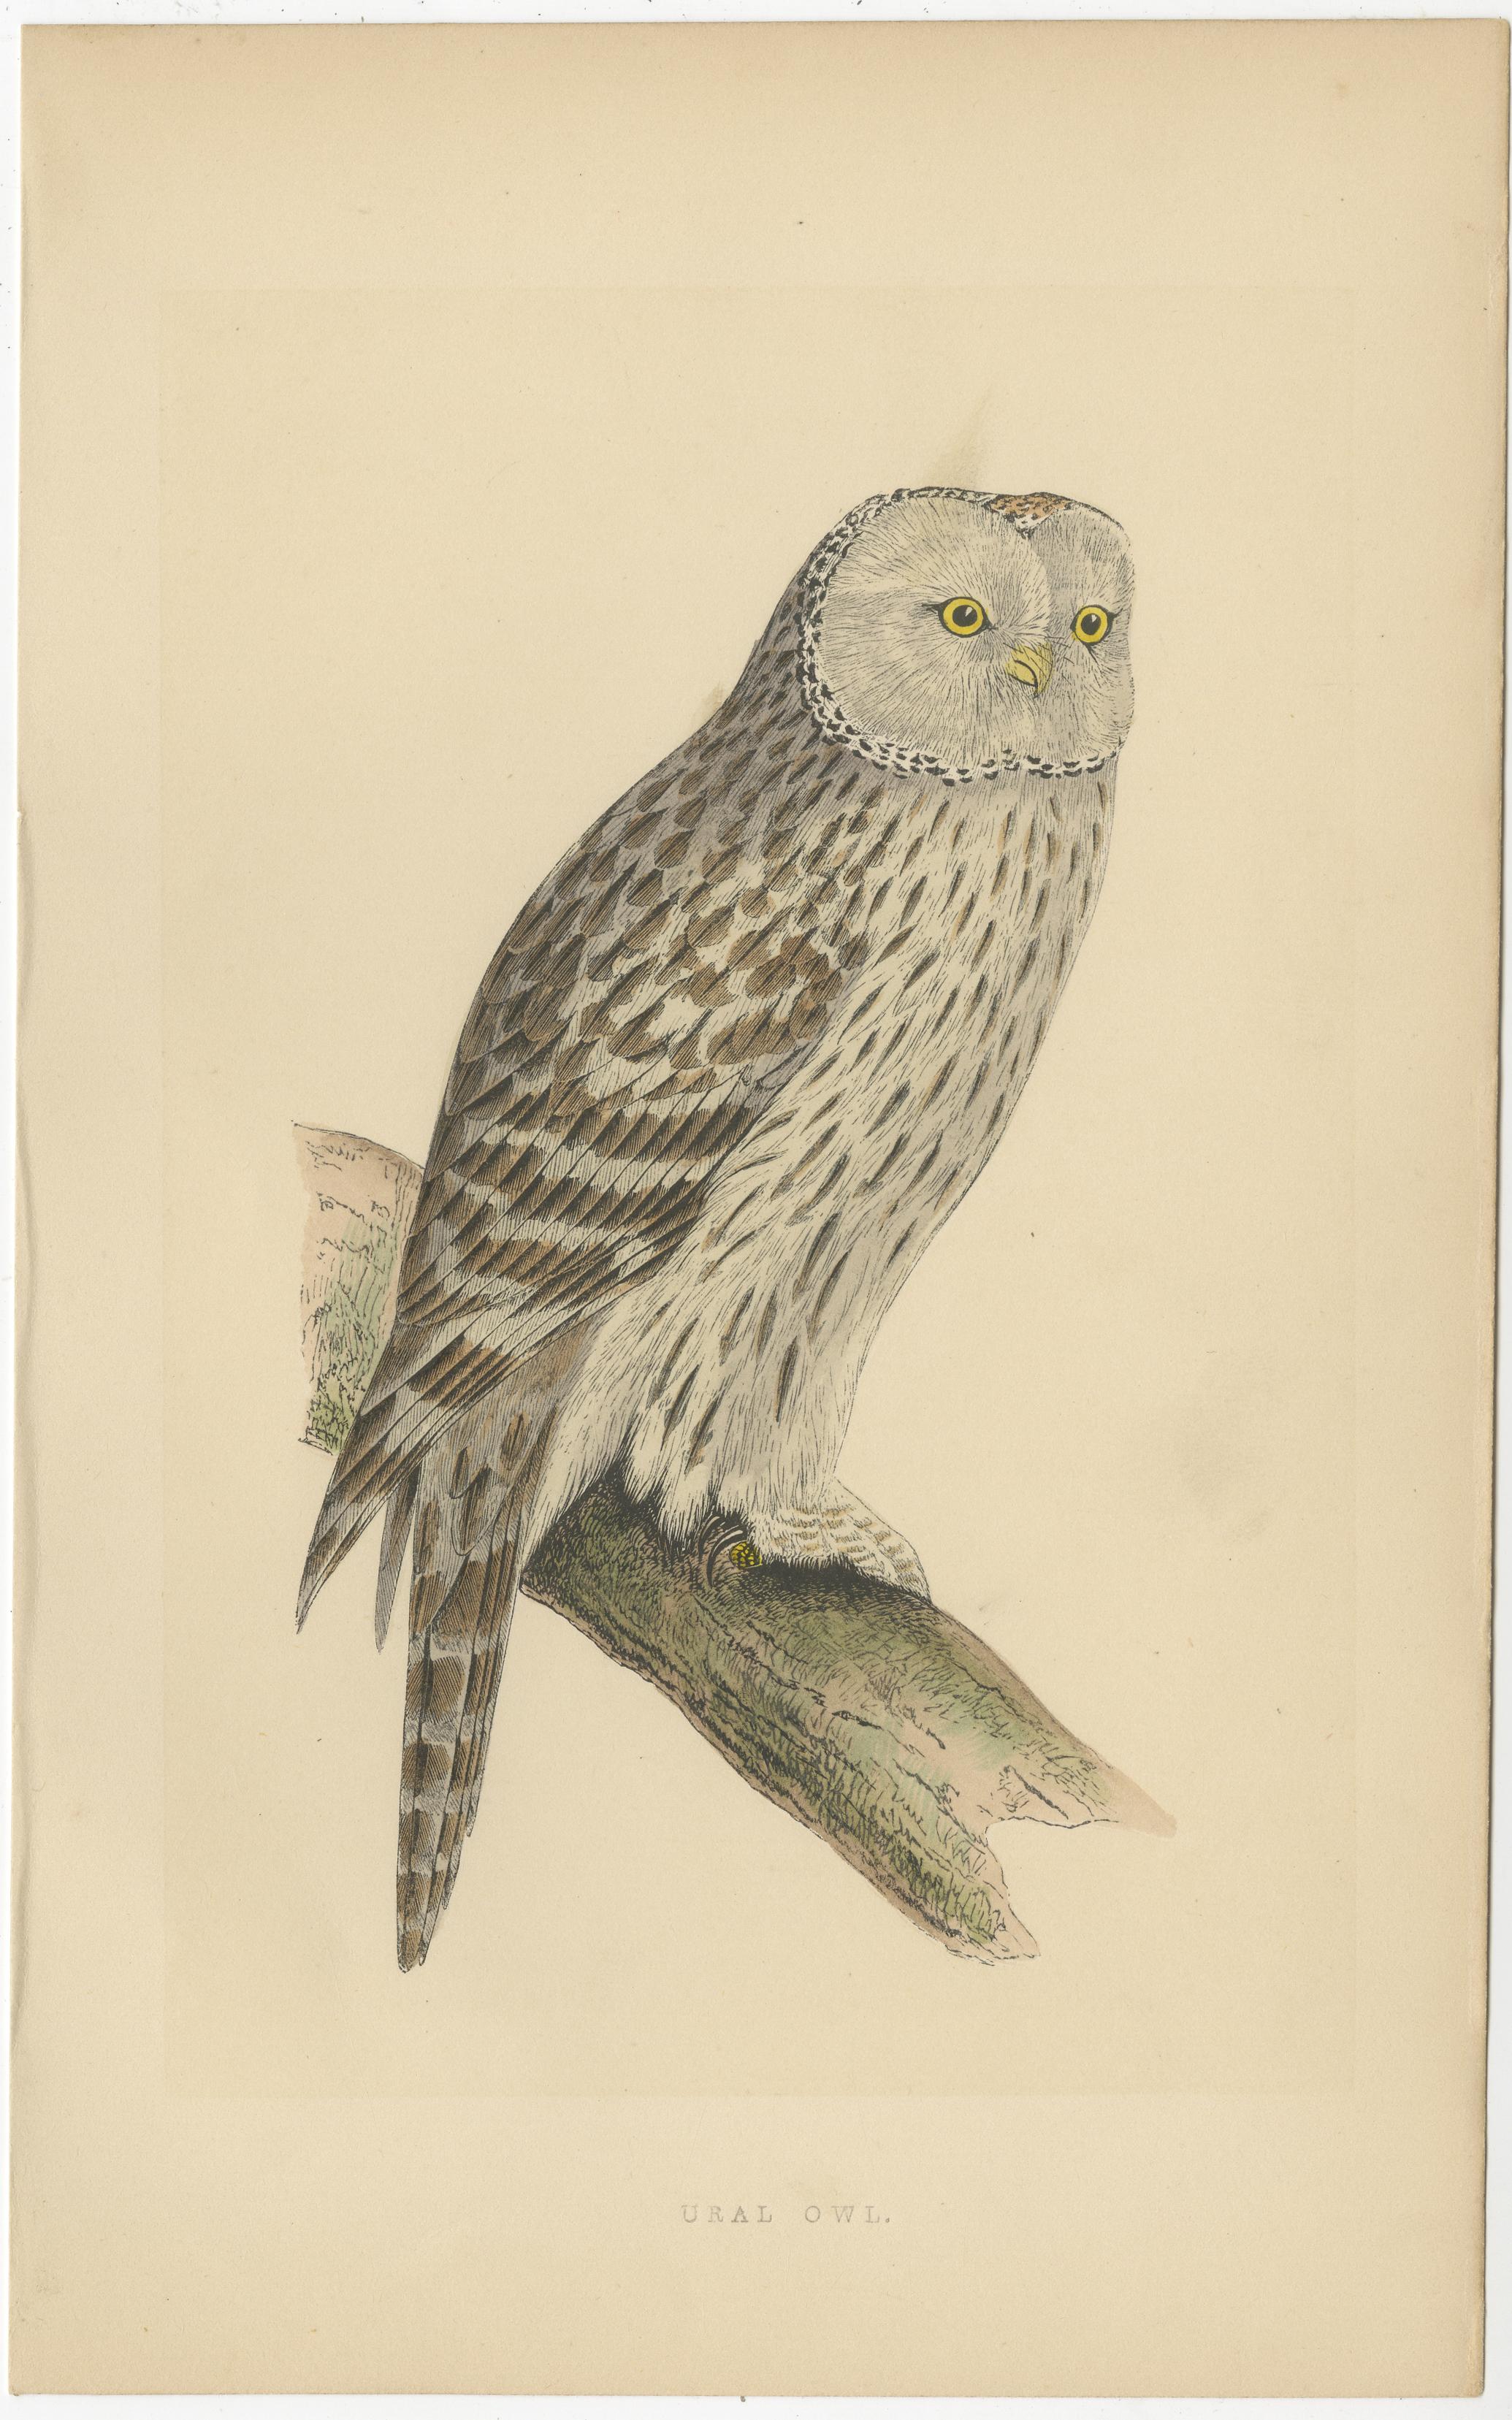 Antique bird print titled 'Ural Owl'. Original old bird print of an ural owl. This print originates from 'A history of the birds of Europe, not observed in the British Isles' by Charles Robert Bree and Benjamin Fawcett. Published circa 1860.